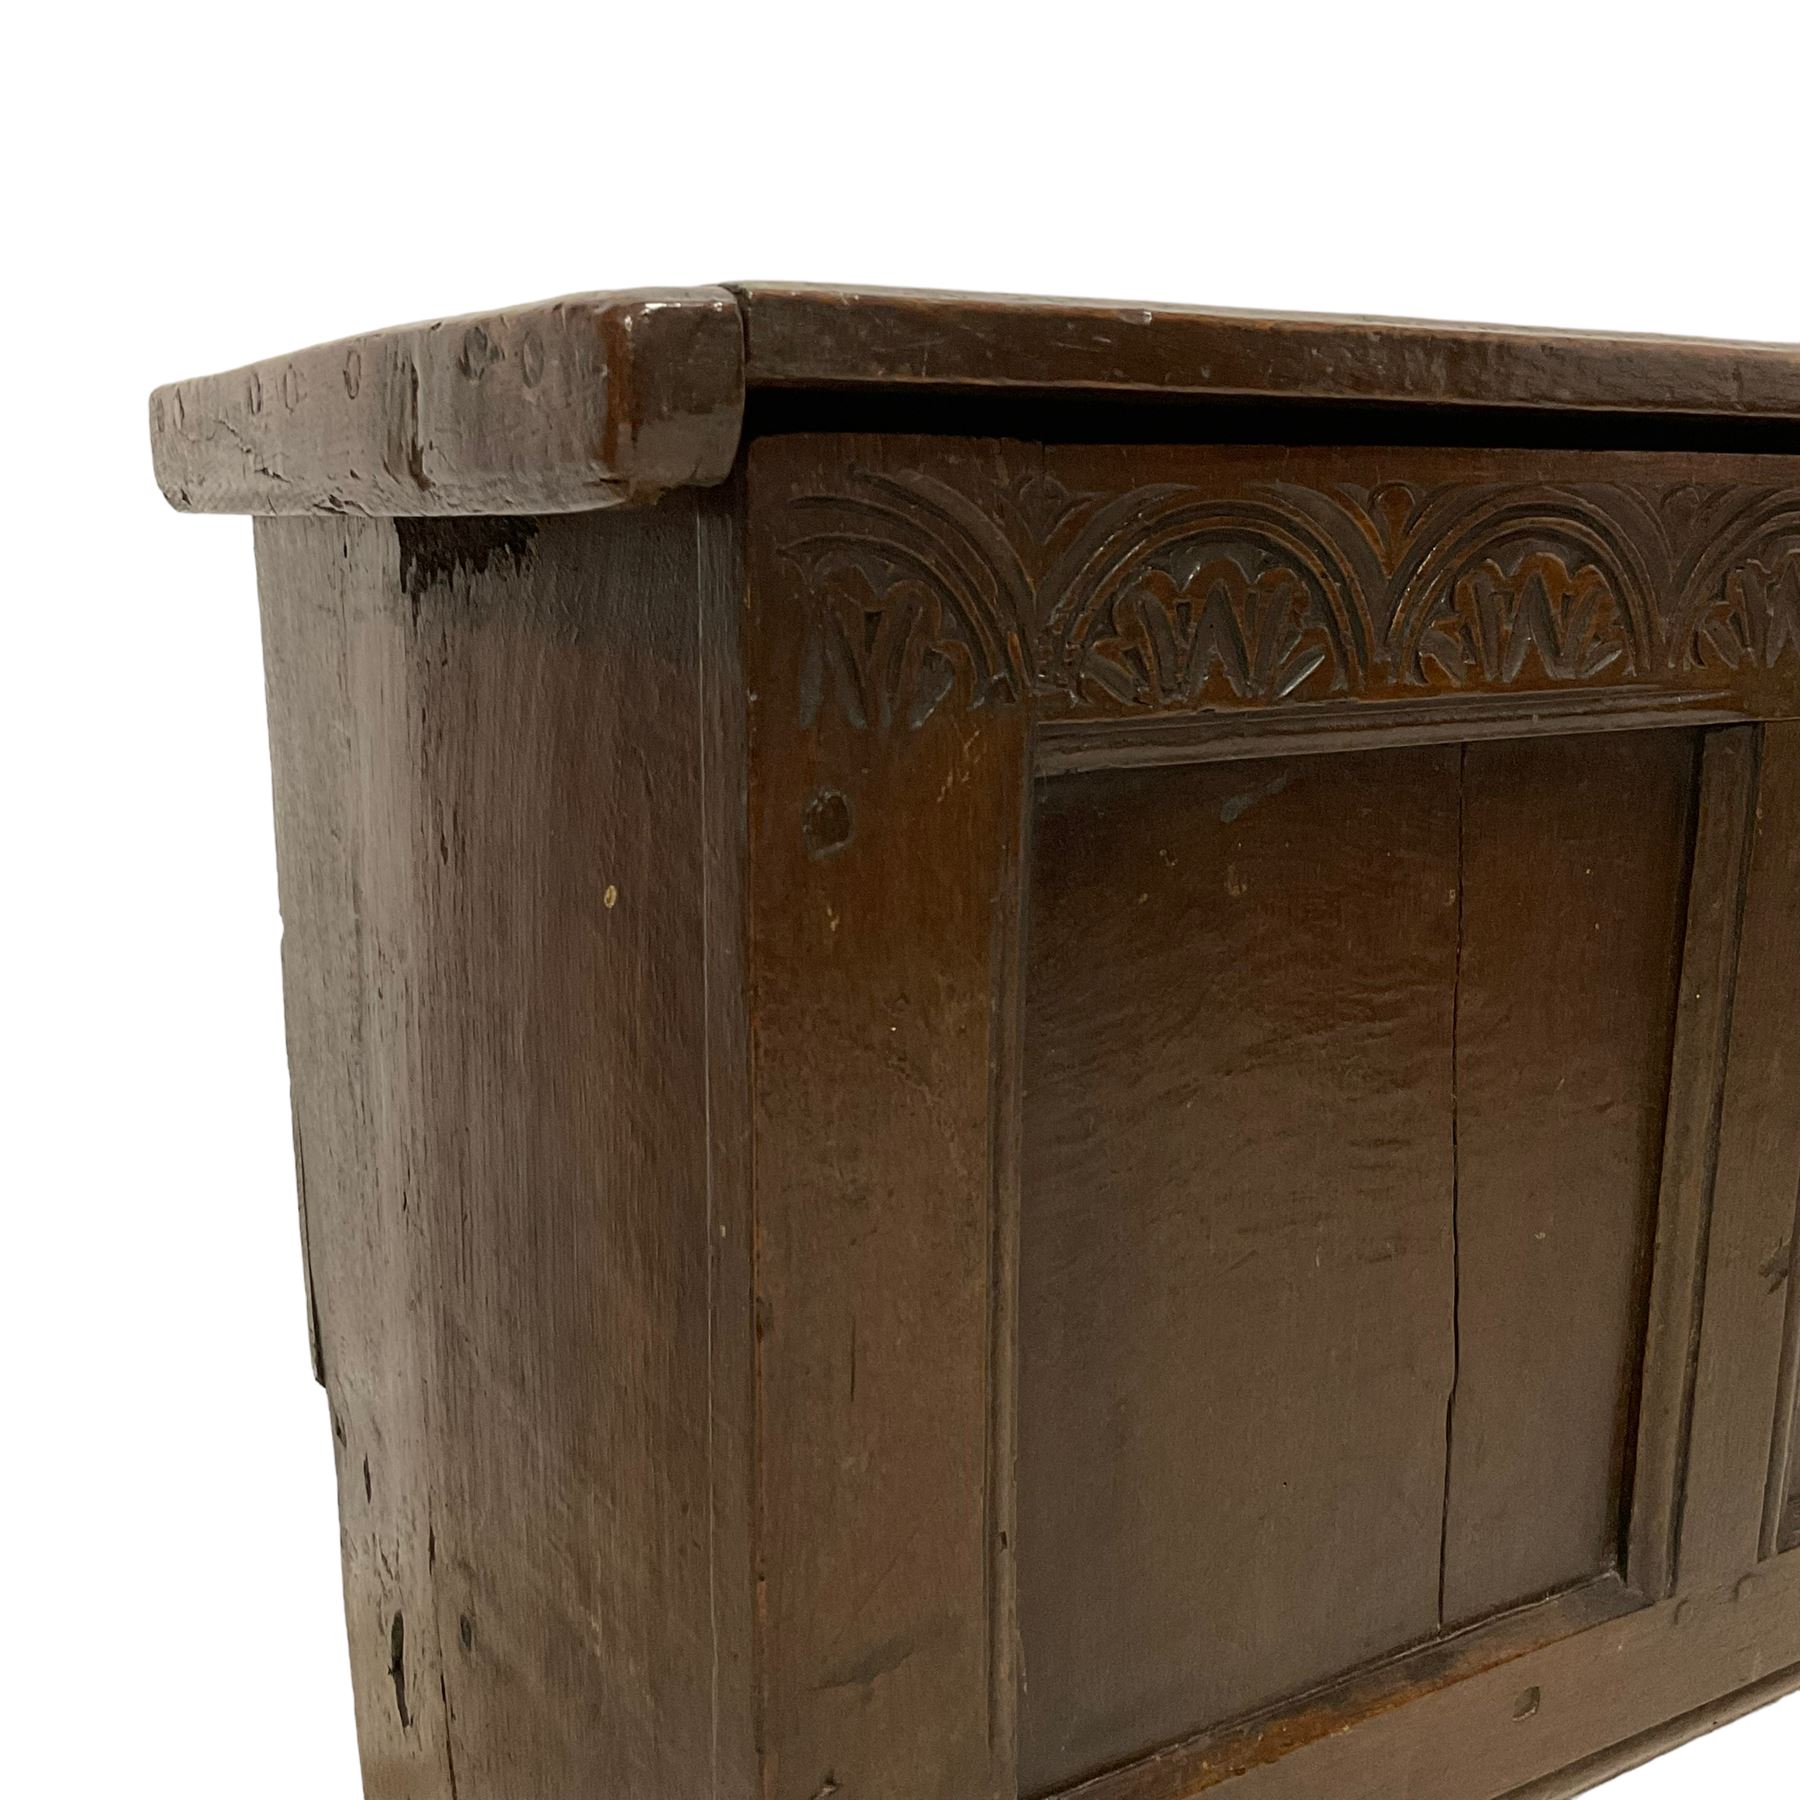 17th century oak six plank coffer or chest - Image 7 of 8